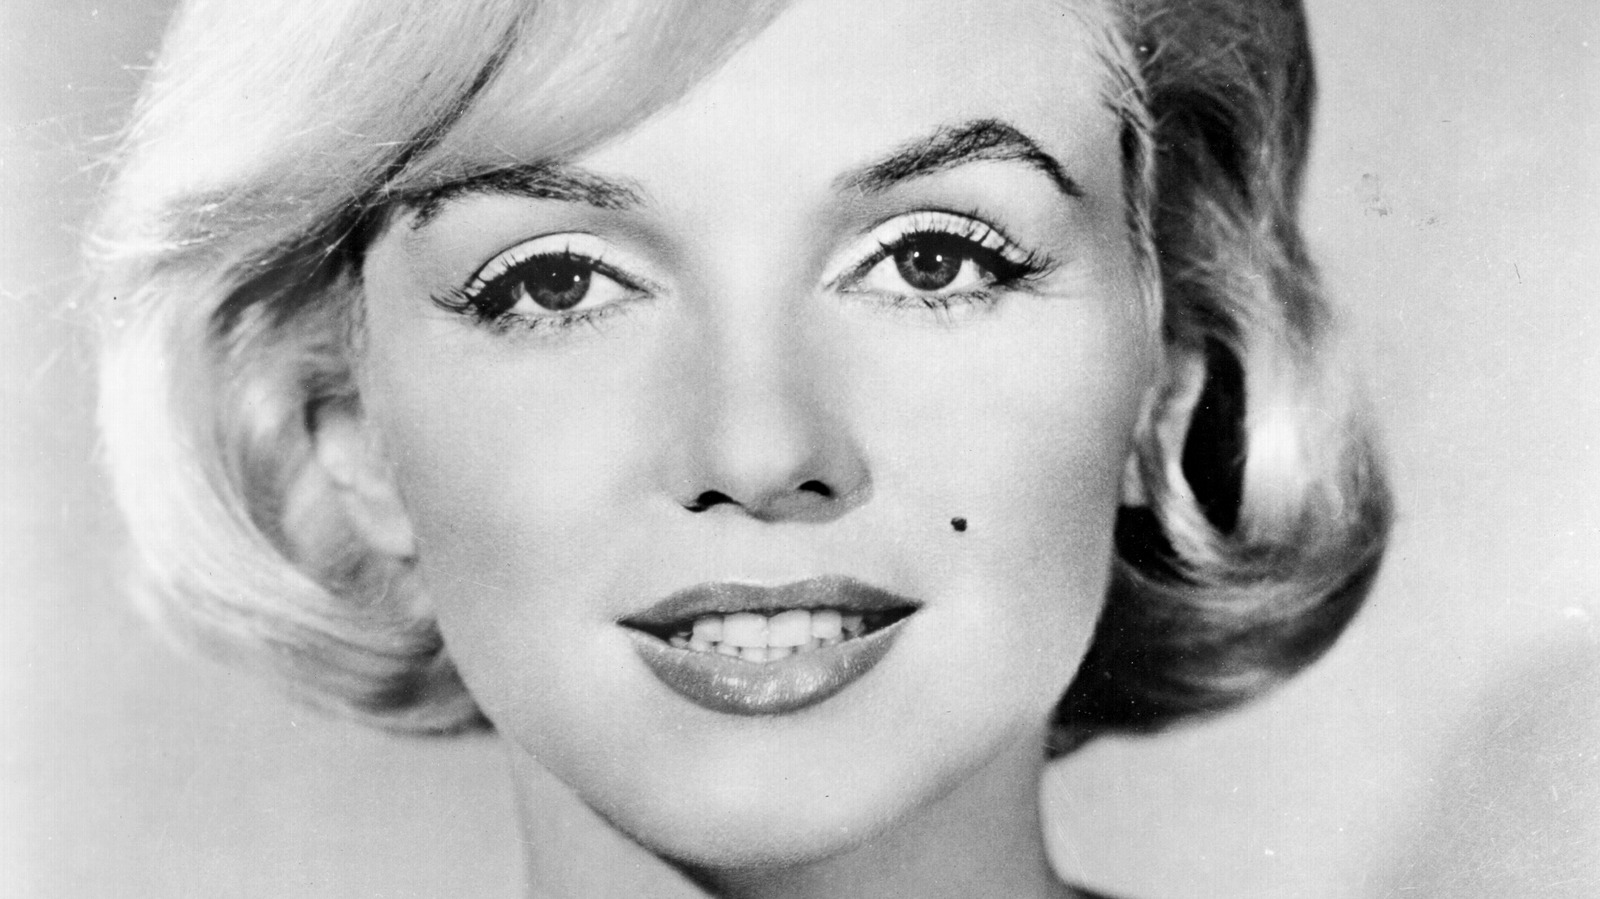 Monroe's Legacy Is Making Fortune, But For Whom? : NPR